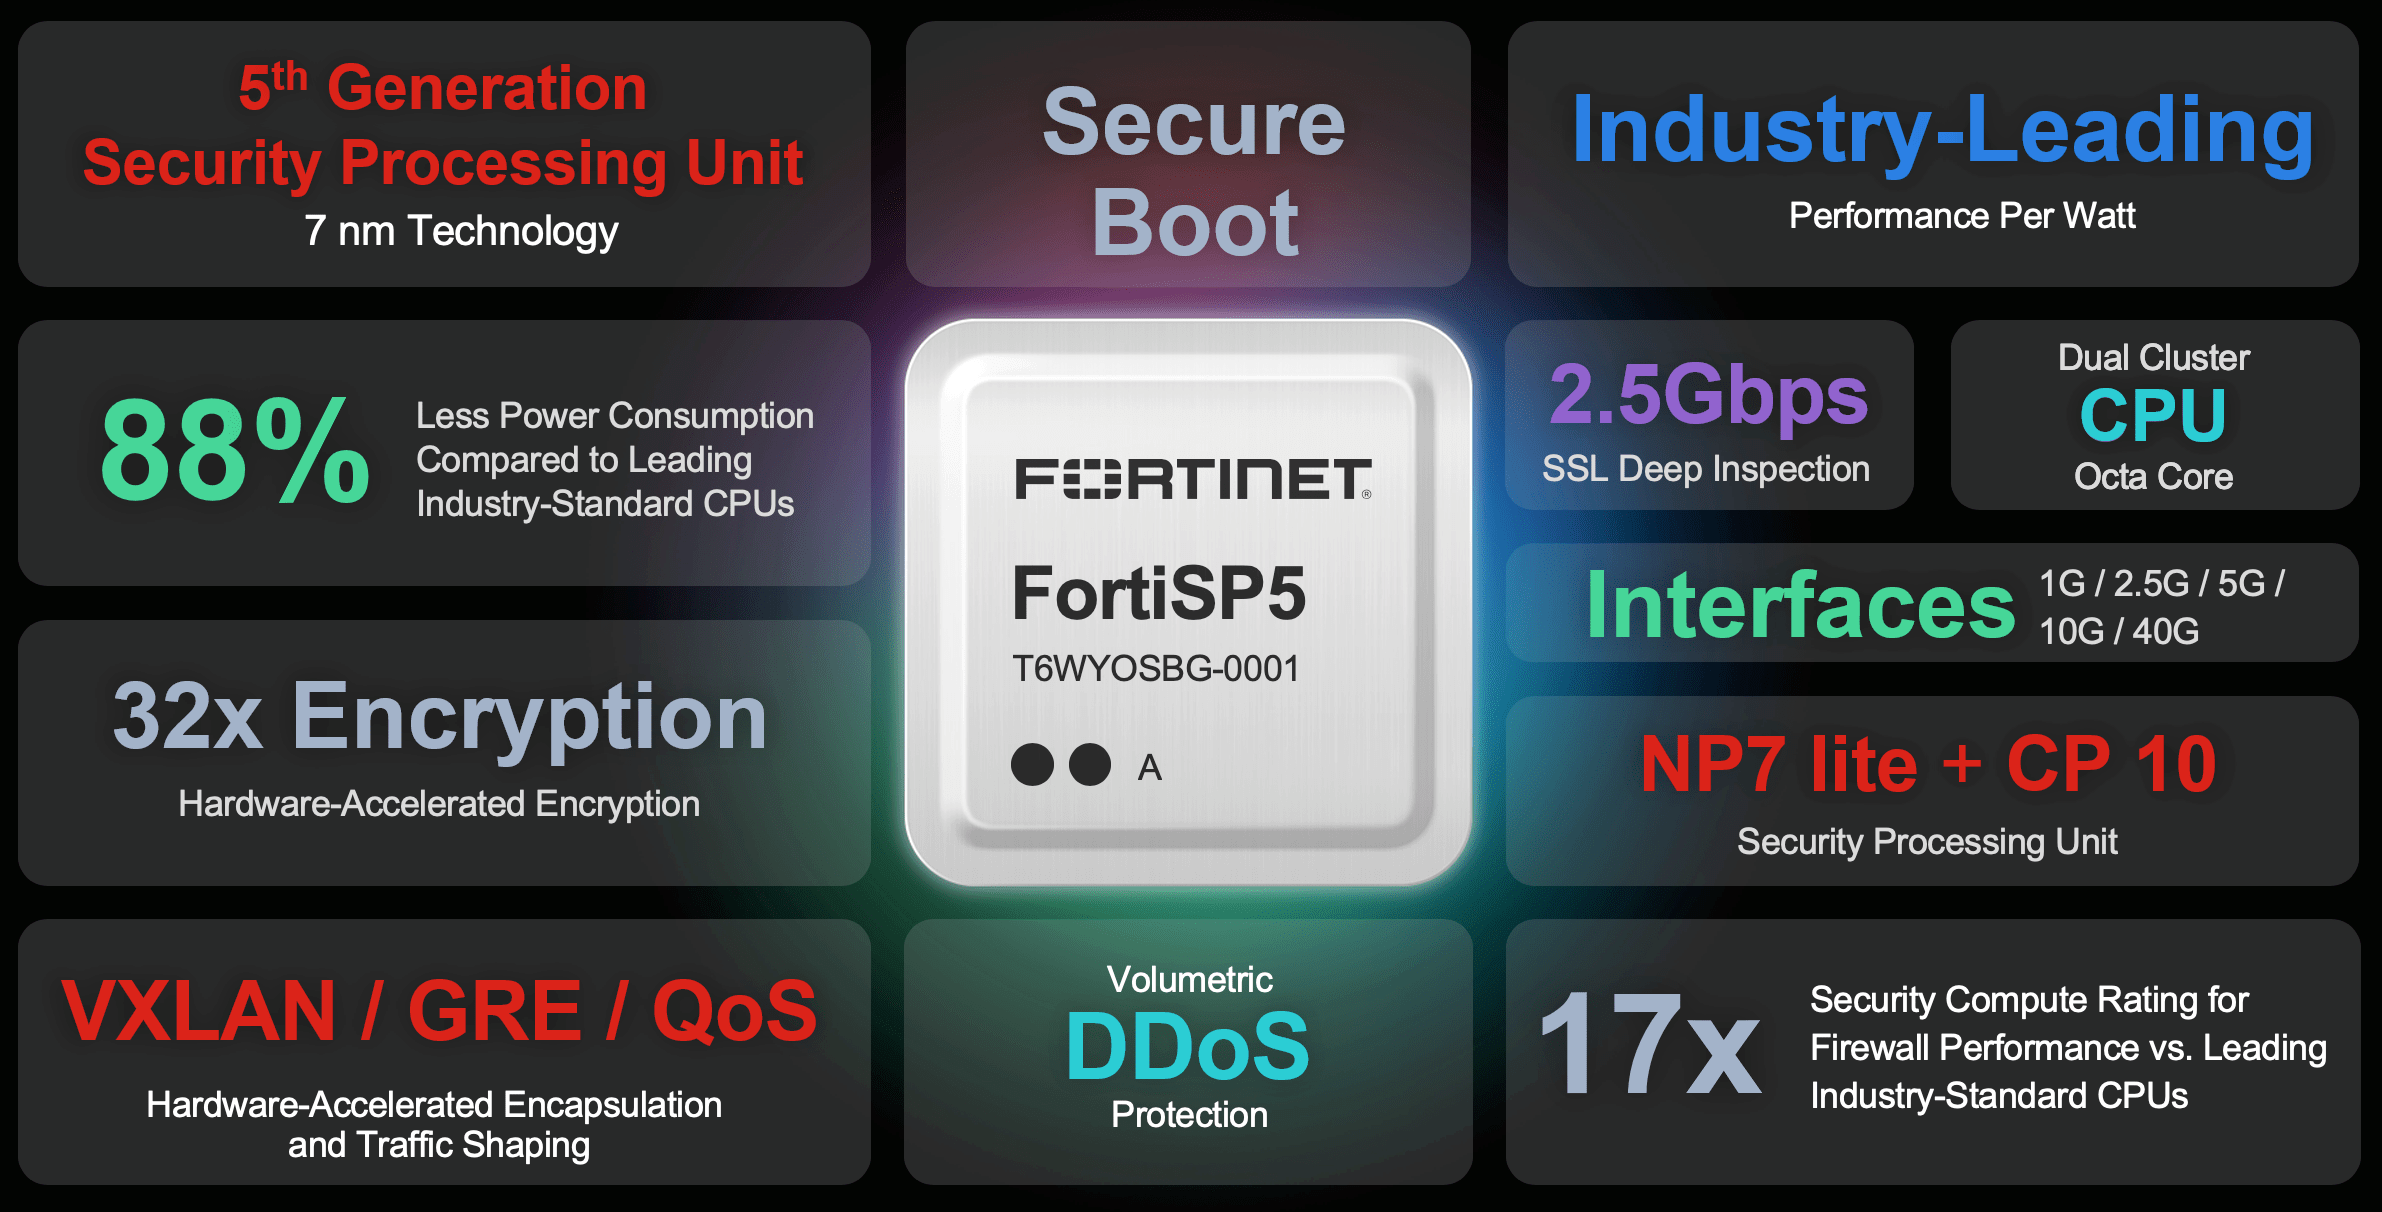 
Fortinet FortiSP5 key features. 5th gen system on a chip with 7 nm technology. Secure boot. Industry-leading performance per watt. 88 percent less power consumption compared to leading industry-standard CPUs. 2.5 Gbps SSL deep inspection. Dual cluster CPU octa core. Interfaces include 1G, 2.5G, 5G, 10G, and 40G. 32x encryption with hardware-accelerated encryption. NP7 lite and CP 10 Security Processing Unit. VXLAN, GRE, QoS hardware-accelerated encapsulation and traffic shaping. Volumetric DDoS protection. 17x Security Compute Rating for firewall performance vs. leading industry-standard CPUs